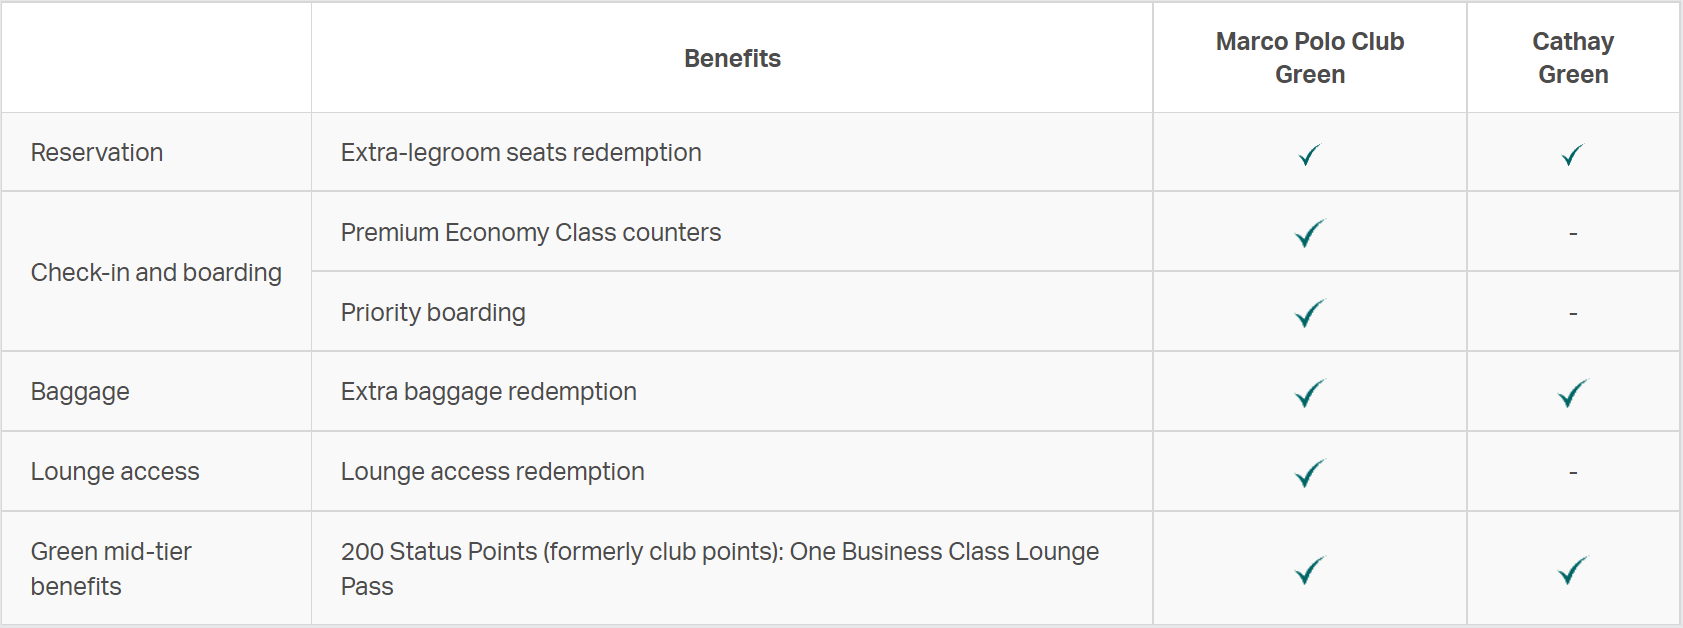 Marco Polo Club Green benefits vs Cathay Green benefits.